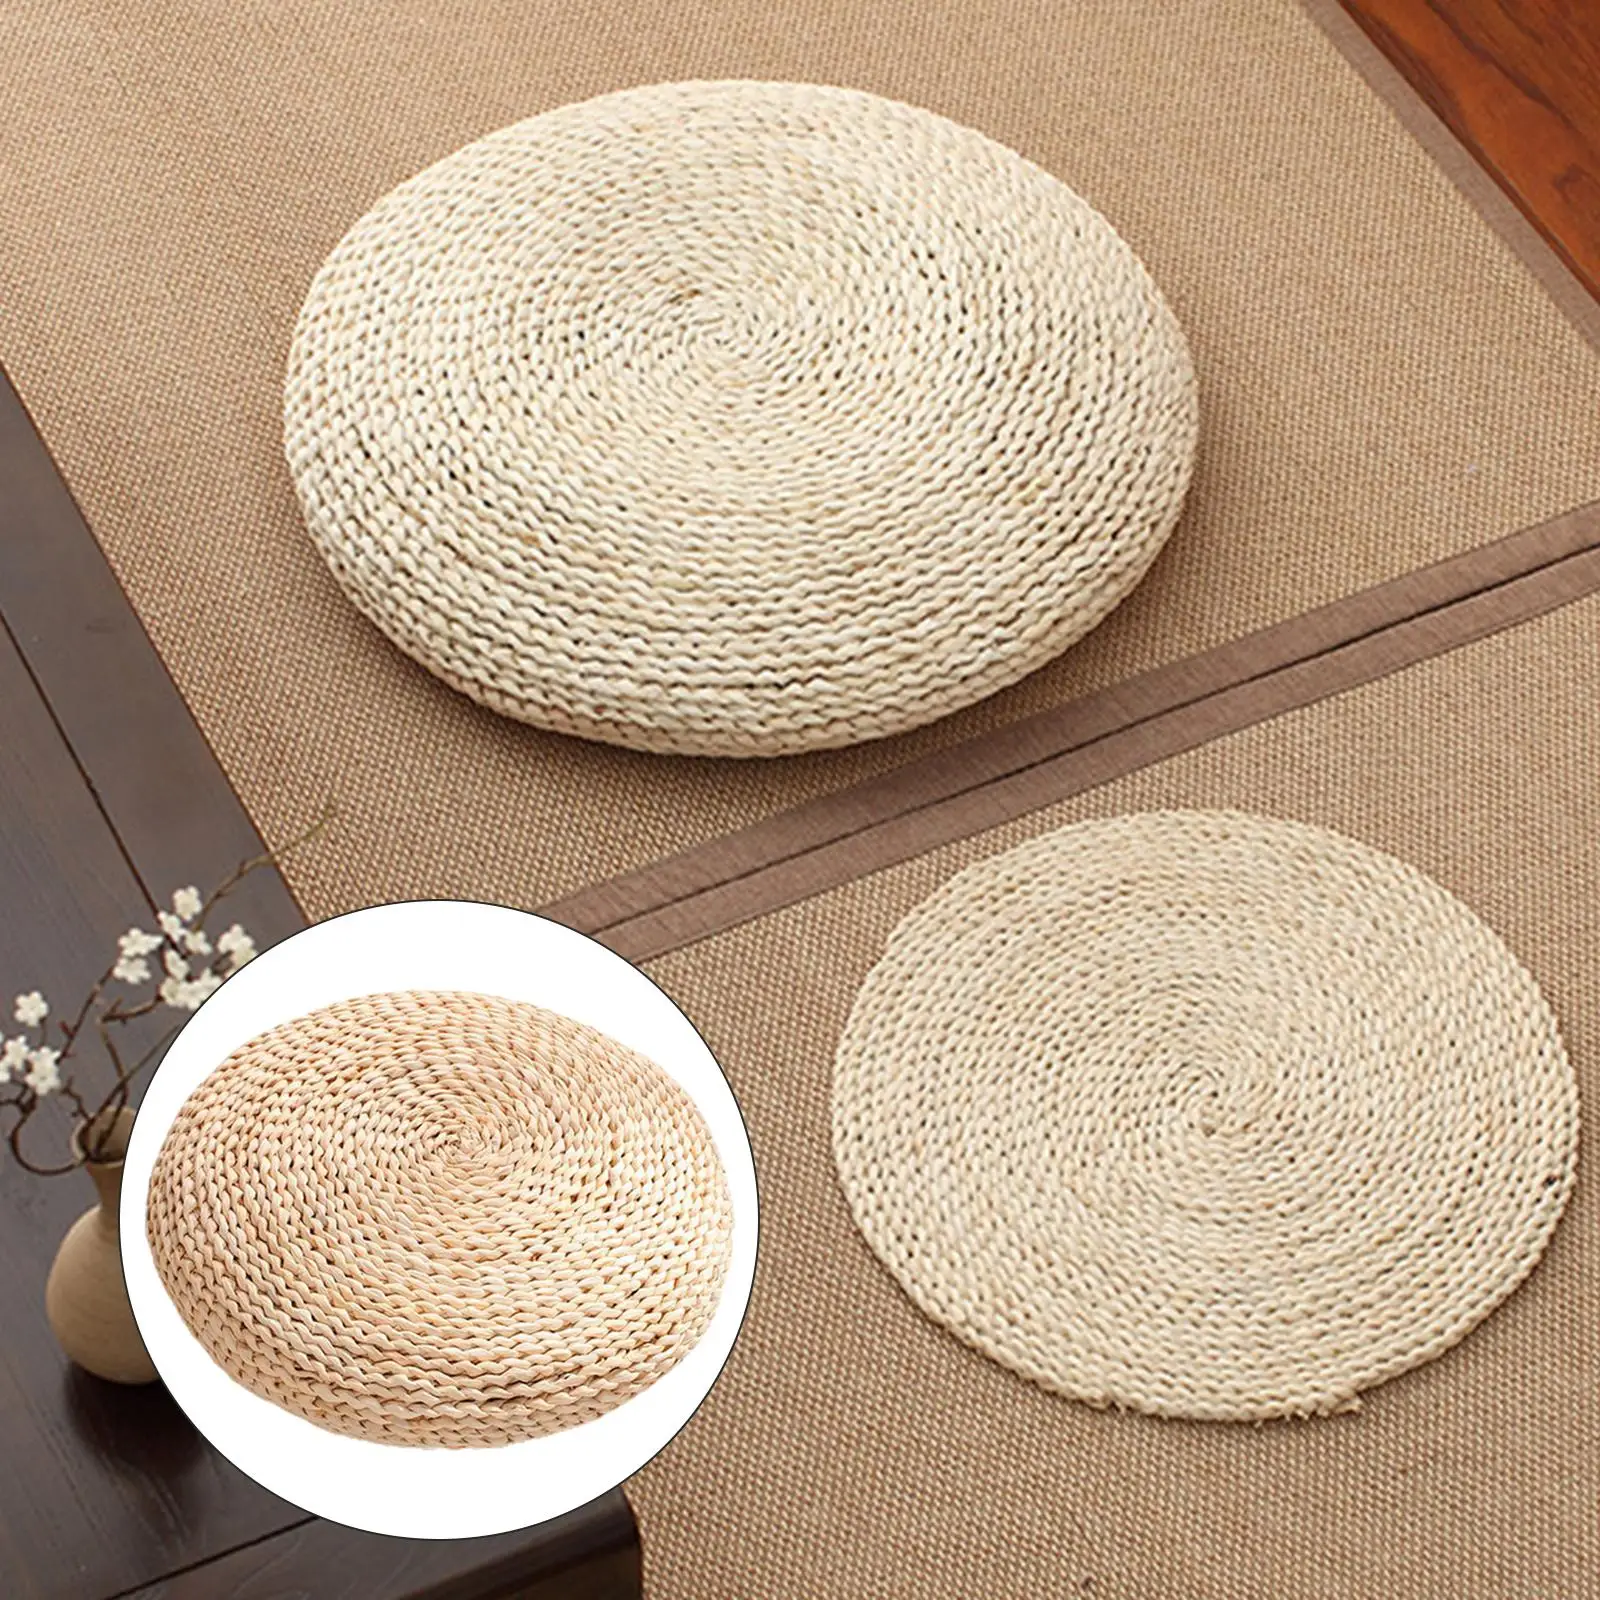 Round Floor Cushions Pillow Straw Pouf Tufted Corduroy Tatami Soft Thick Floor Seat Pillows for Rocking Pad